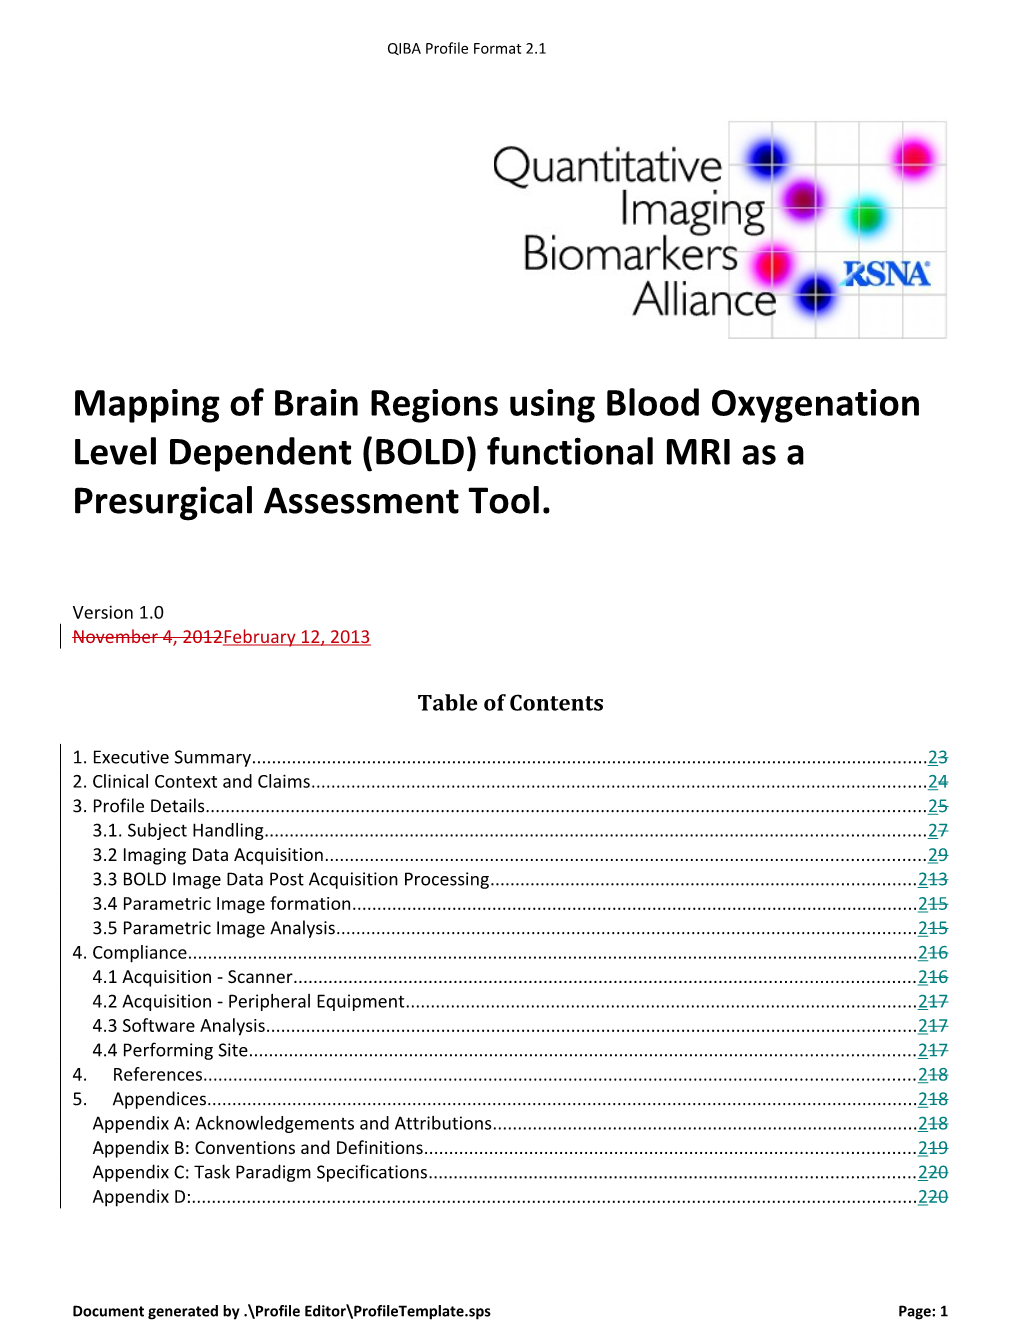 Mapping of Brain Regions Using Blood Oxygenation Level Dependent (BOLD) Functional MRI